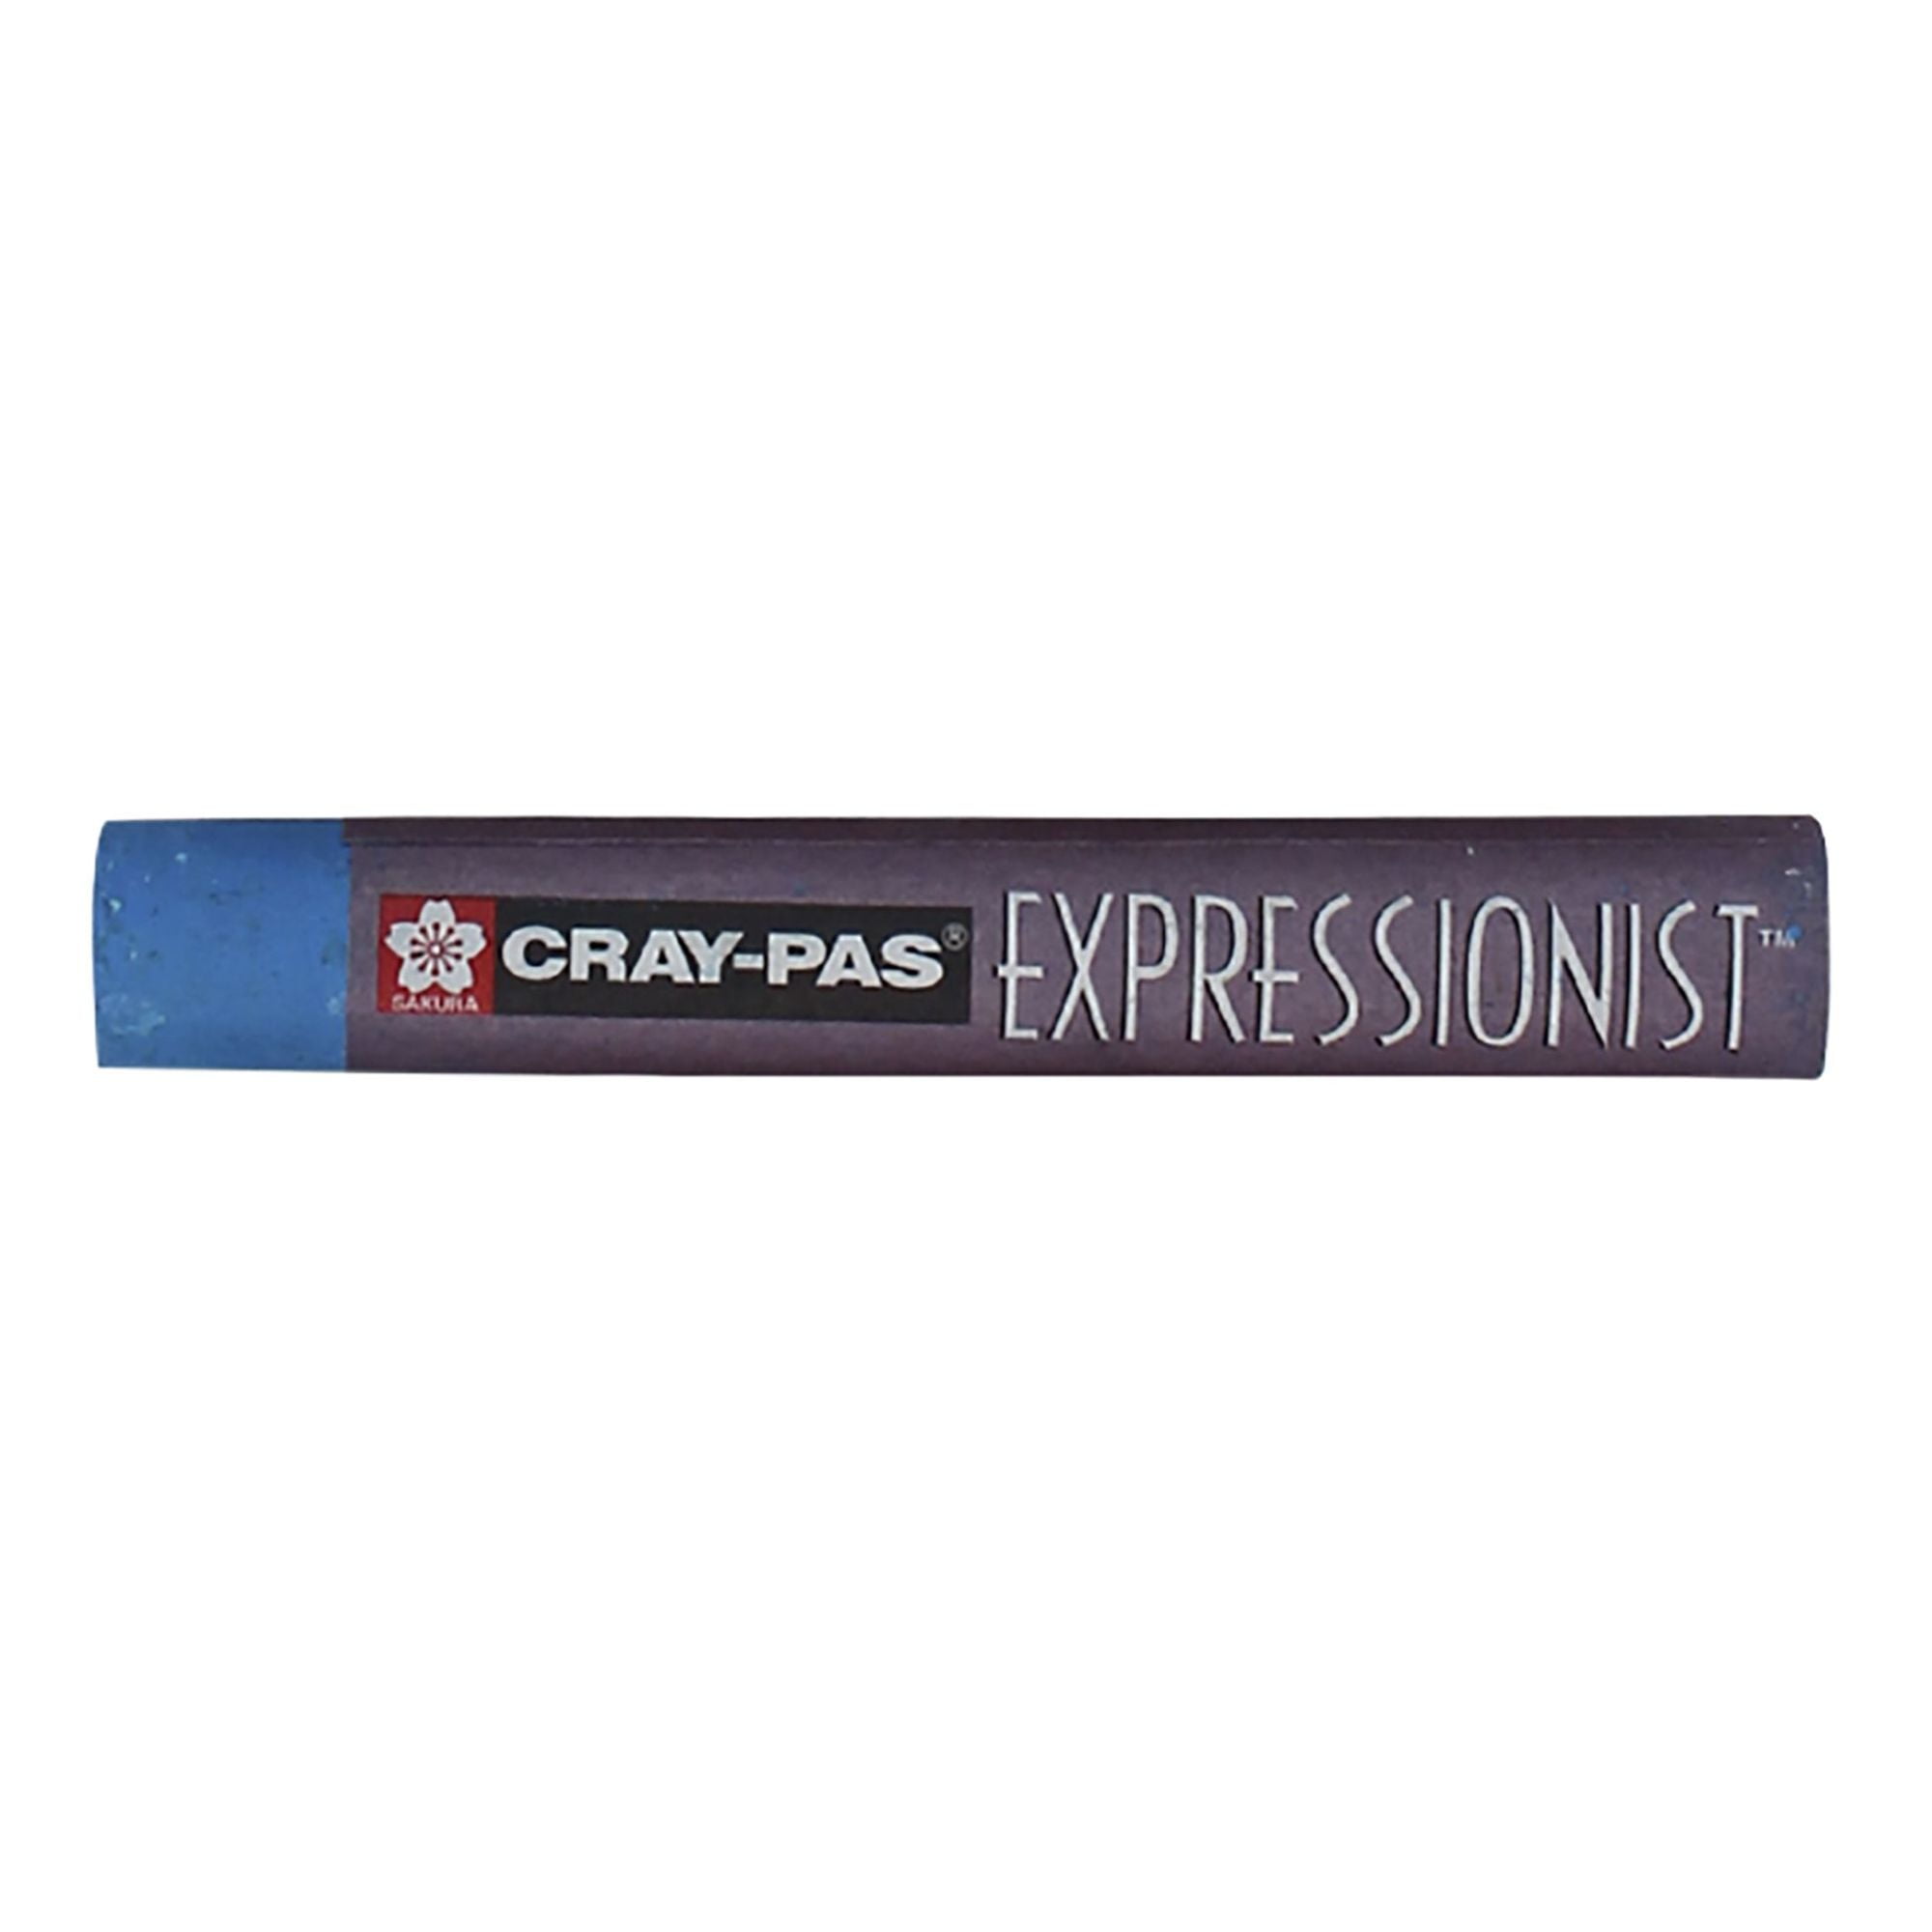 20 Colors of Cray-Pas Thick Crayons